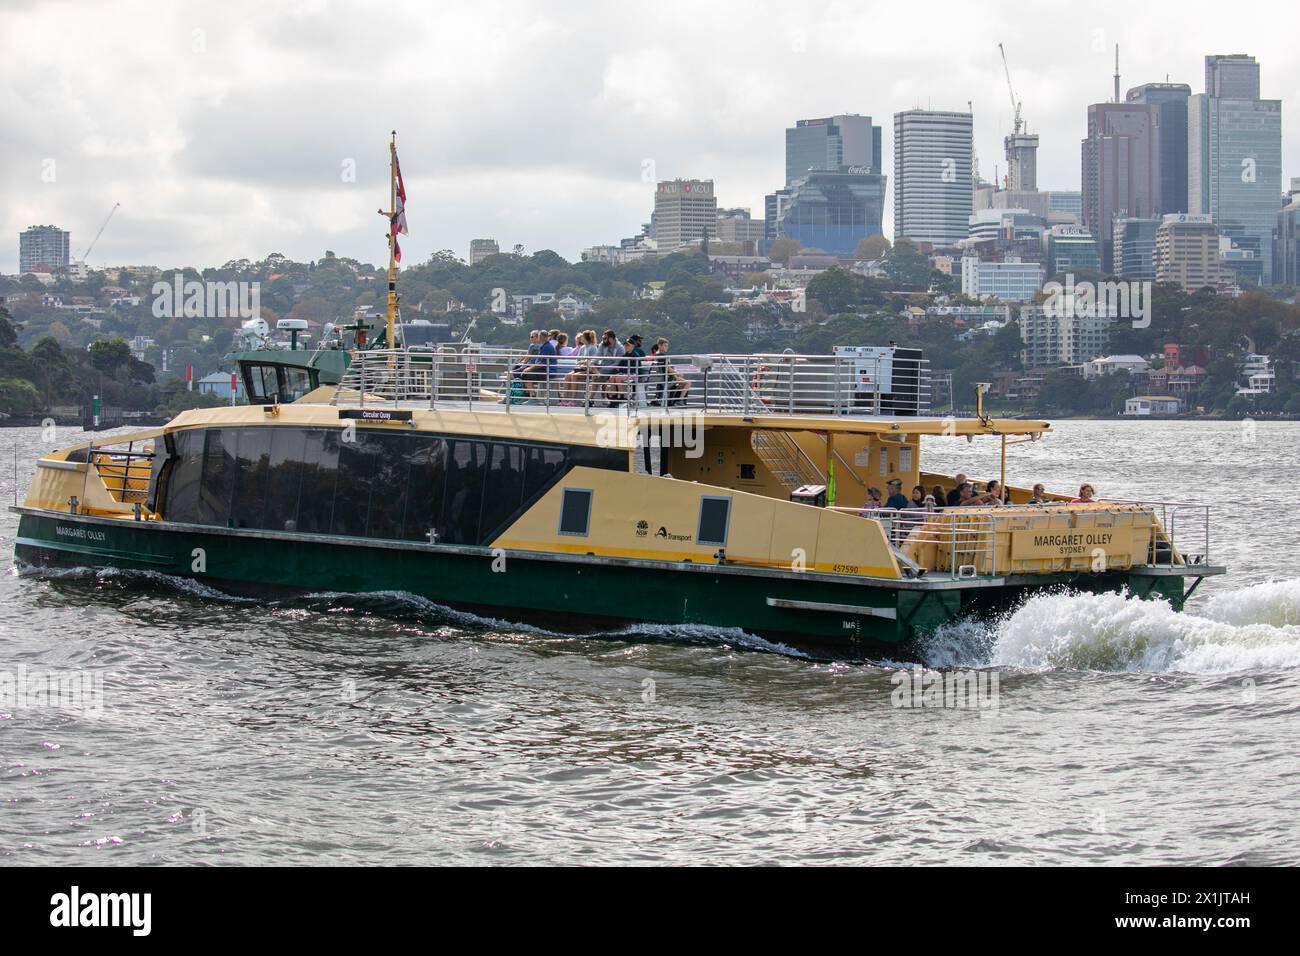 Sydney ferry, the MV Margaret Olley with passengers on the top deck, heads to Balmain East ferry wharf,Sydney harbour,NSW,Australia Stock Photo